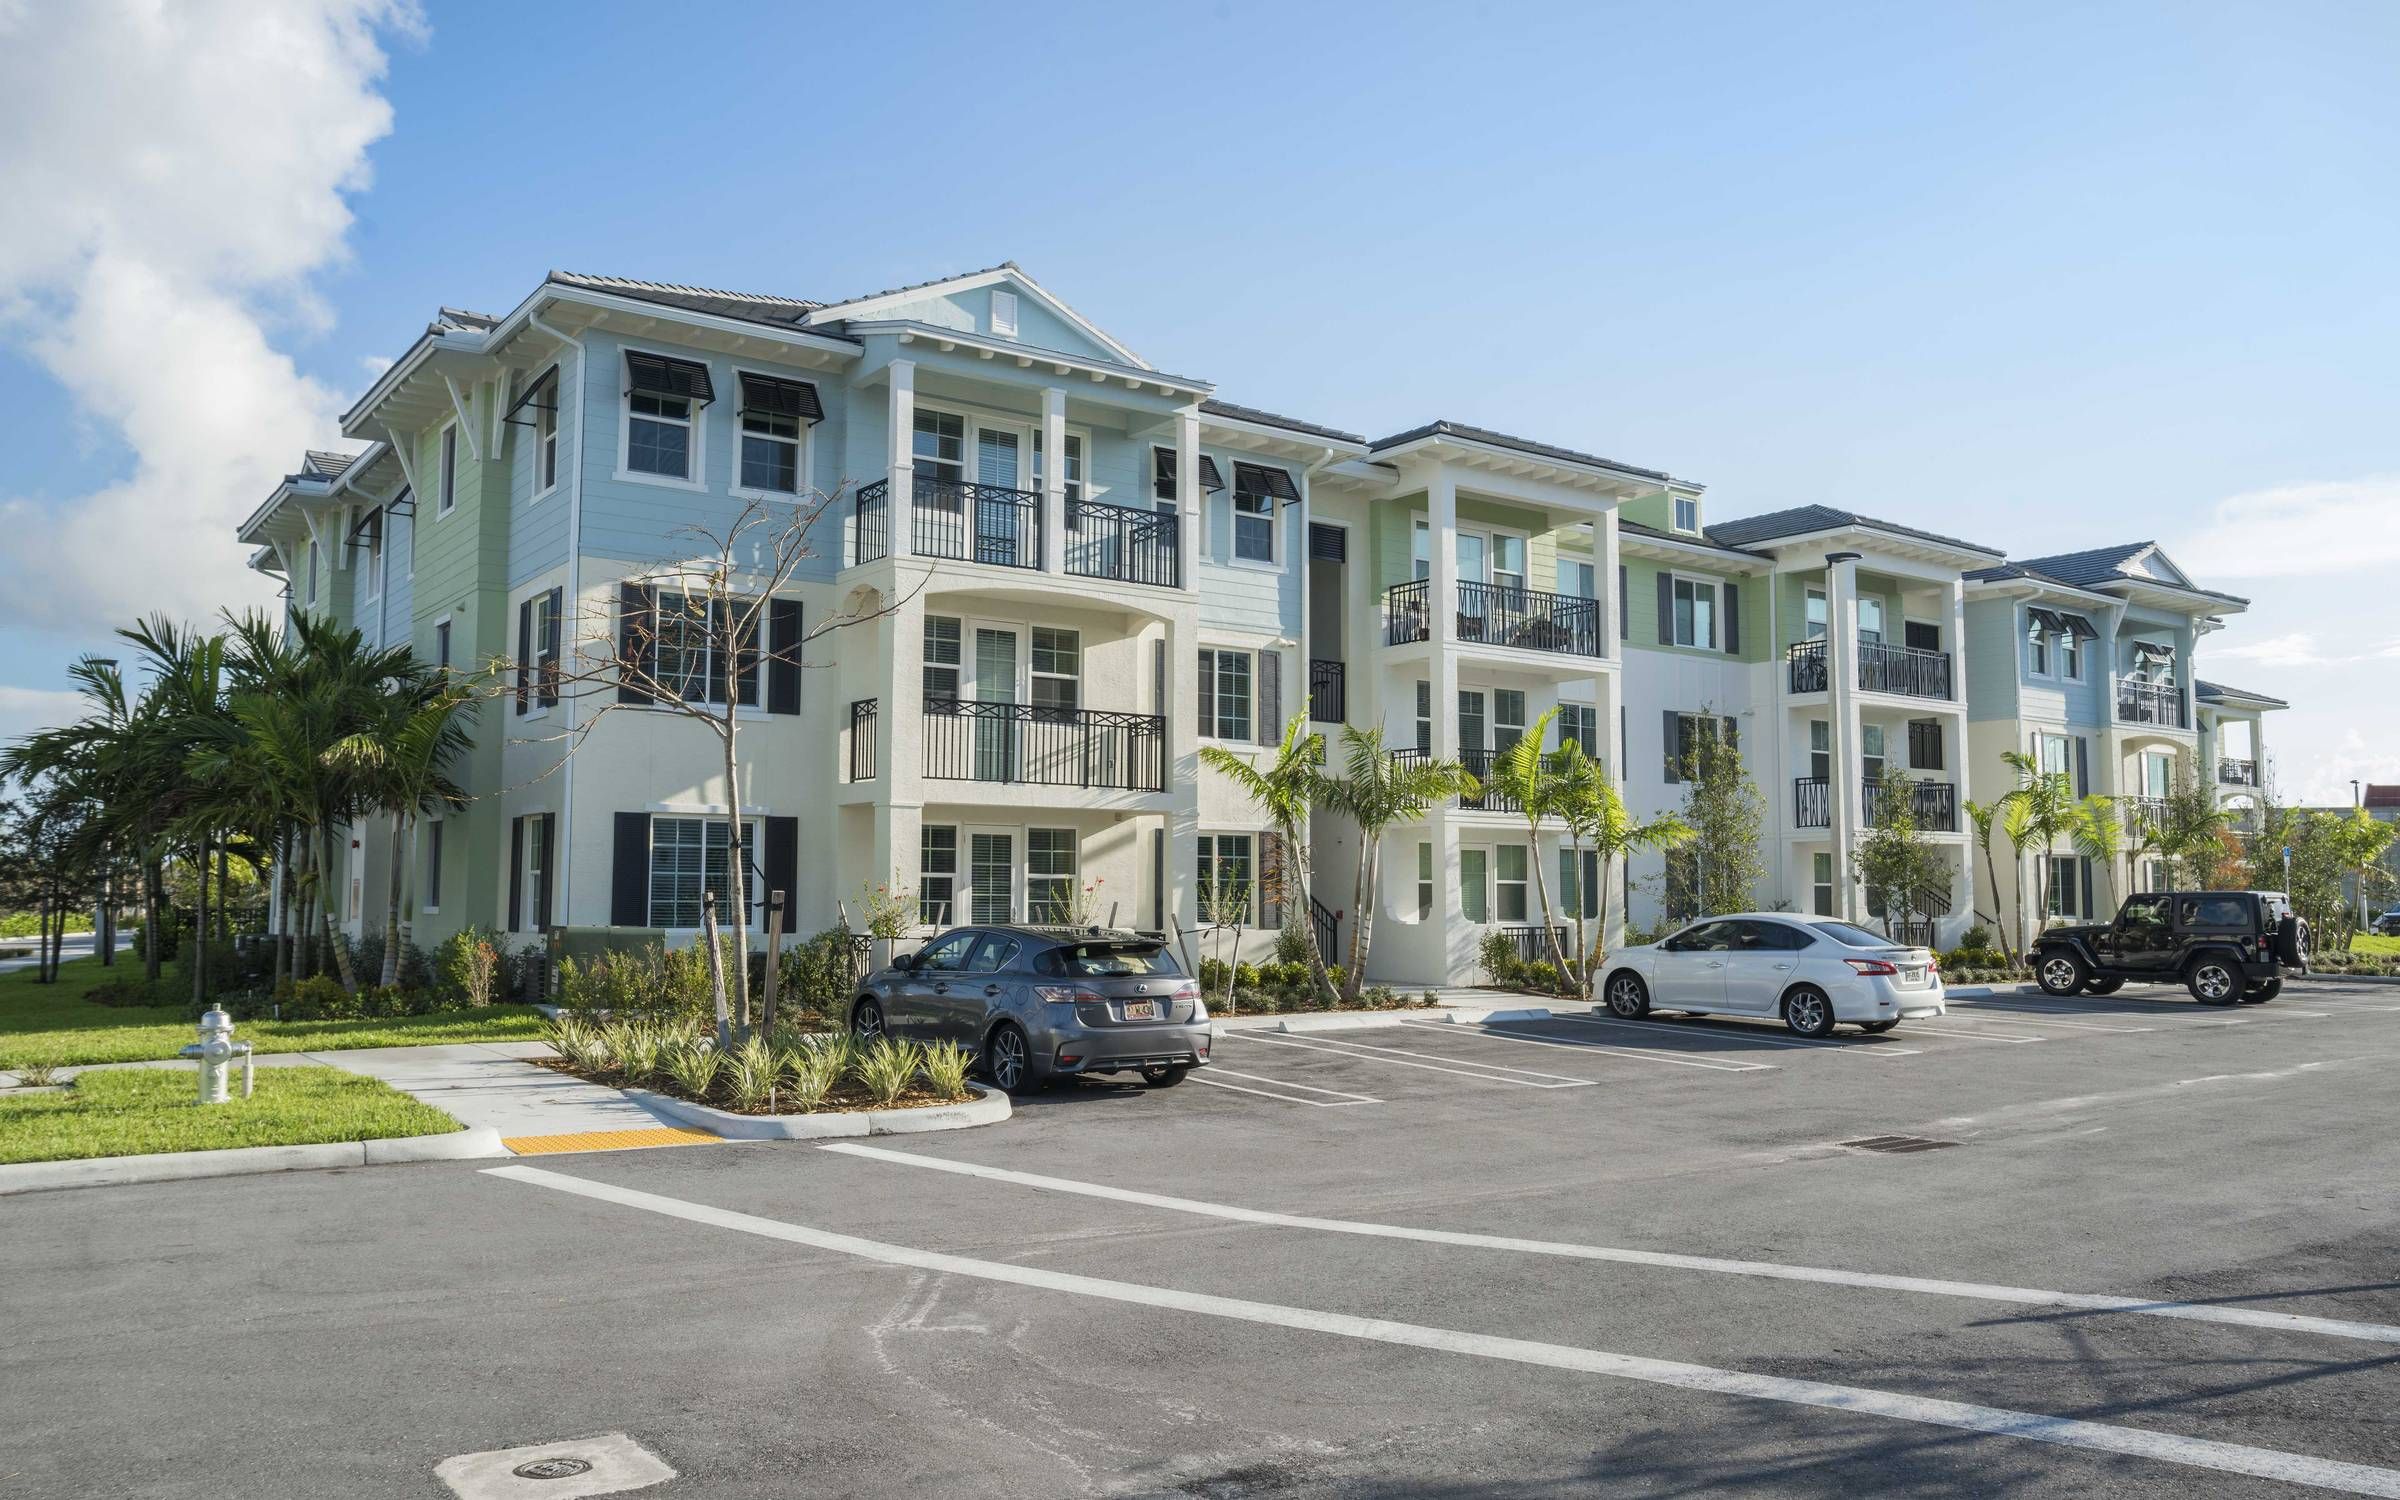 Delray Station apartment complex exterior with pastel-colored paint and beachy architecture.